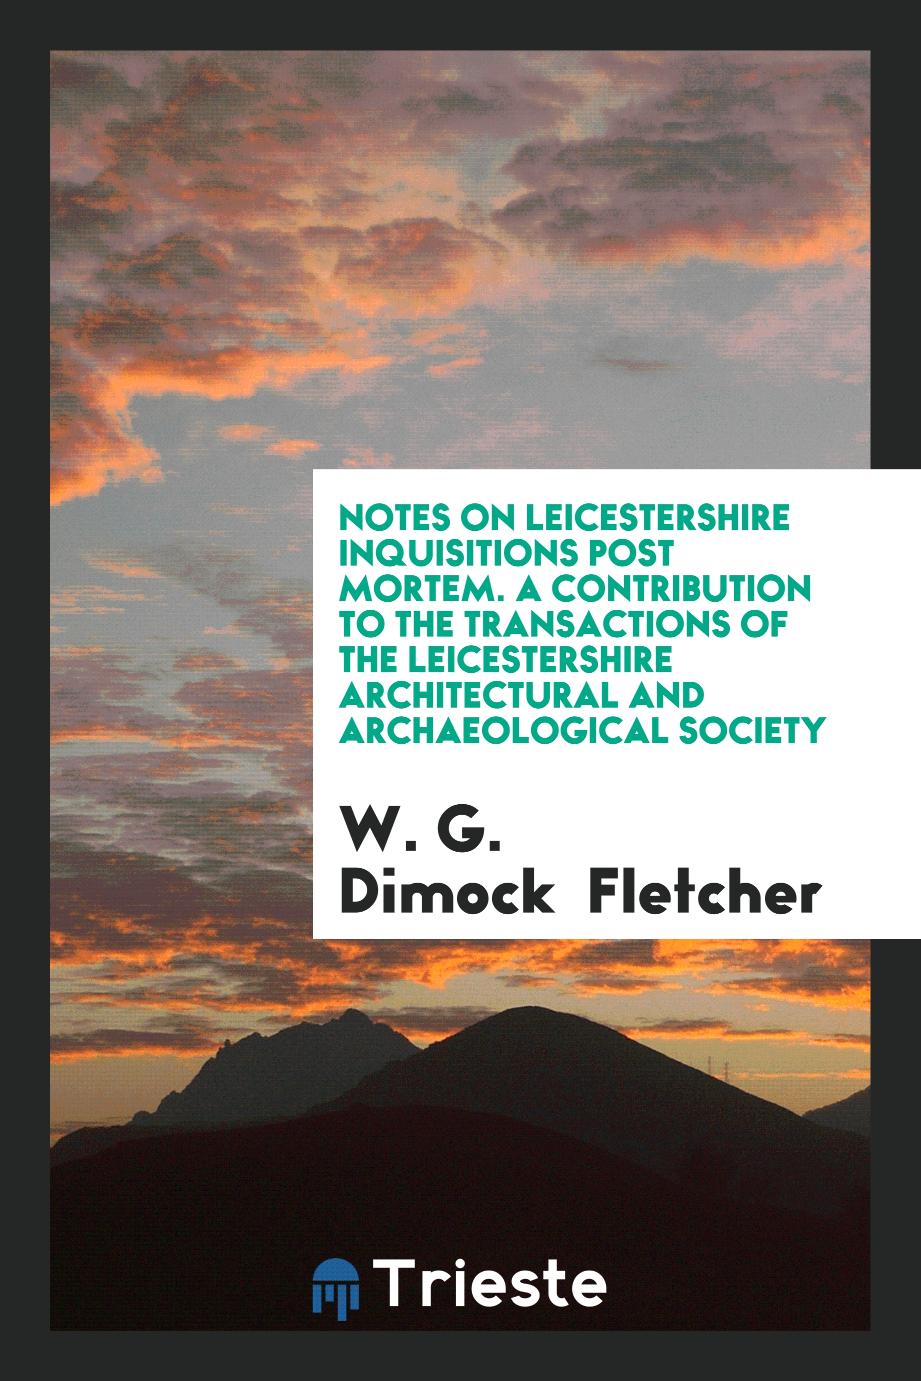 Notes on Leicestershire inquisitions post mortem. A Contribution to the Transactions of the Leicestershire Architectural and Archaeological Society